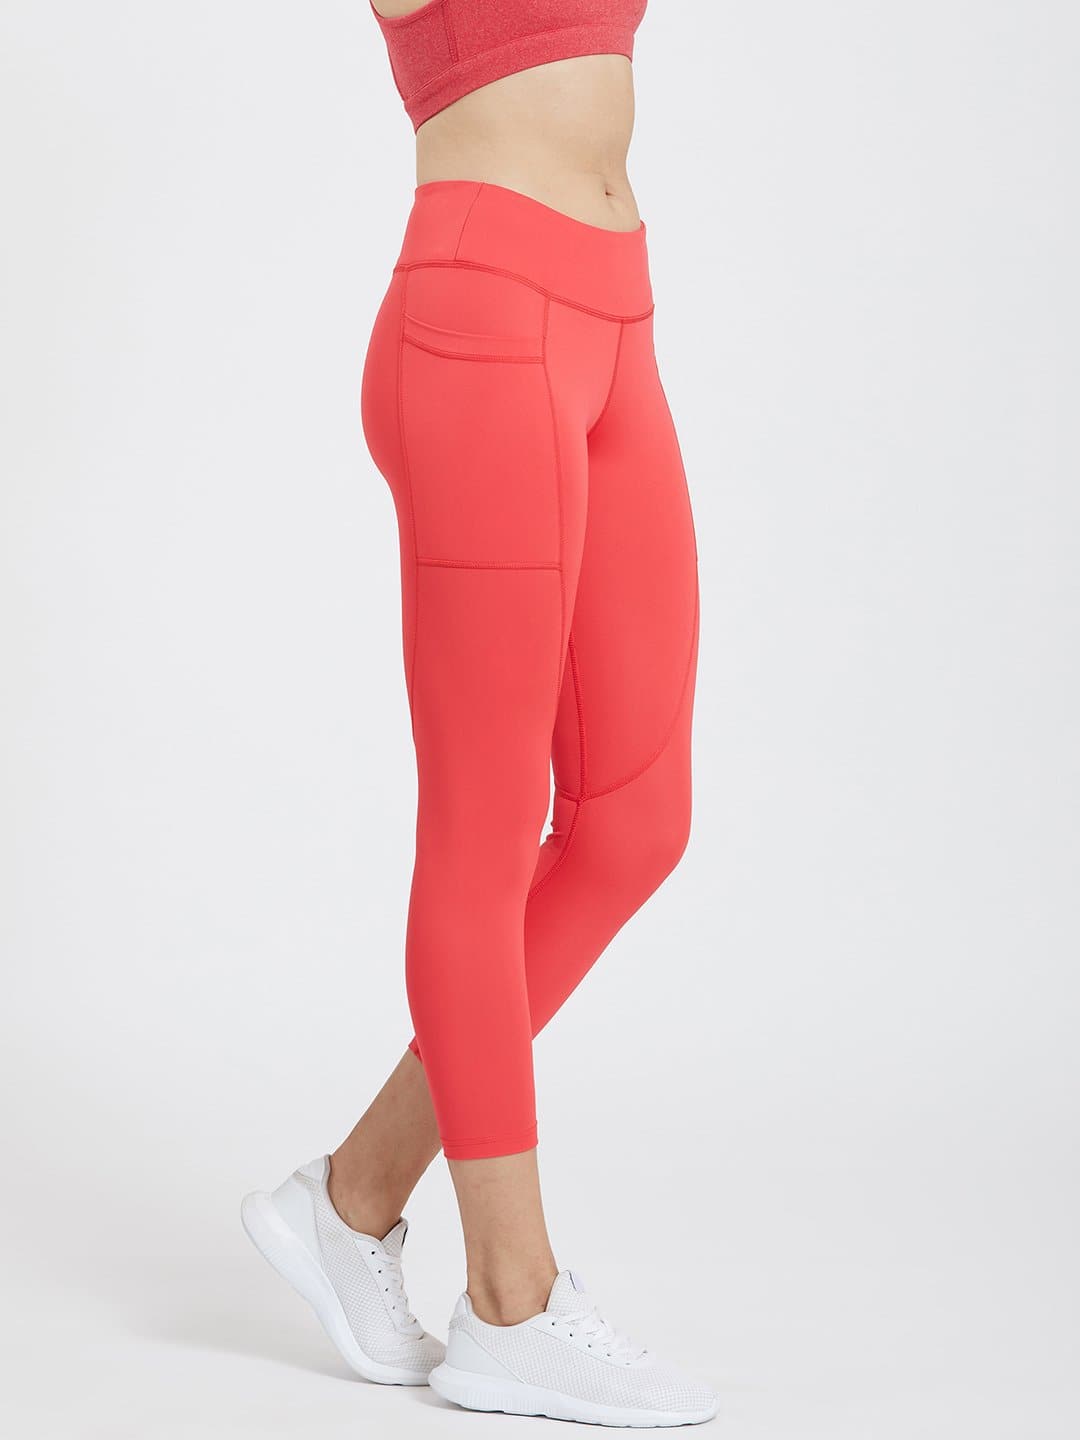 Maxtreme Power me Flame Red Ankle Pocket Leggings